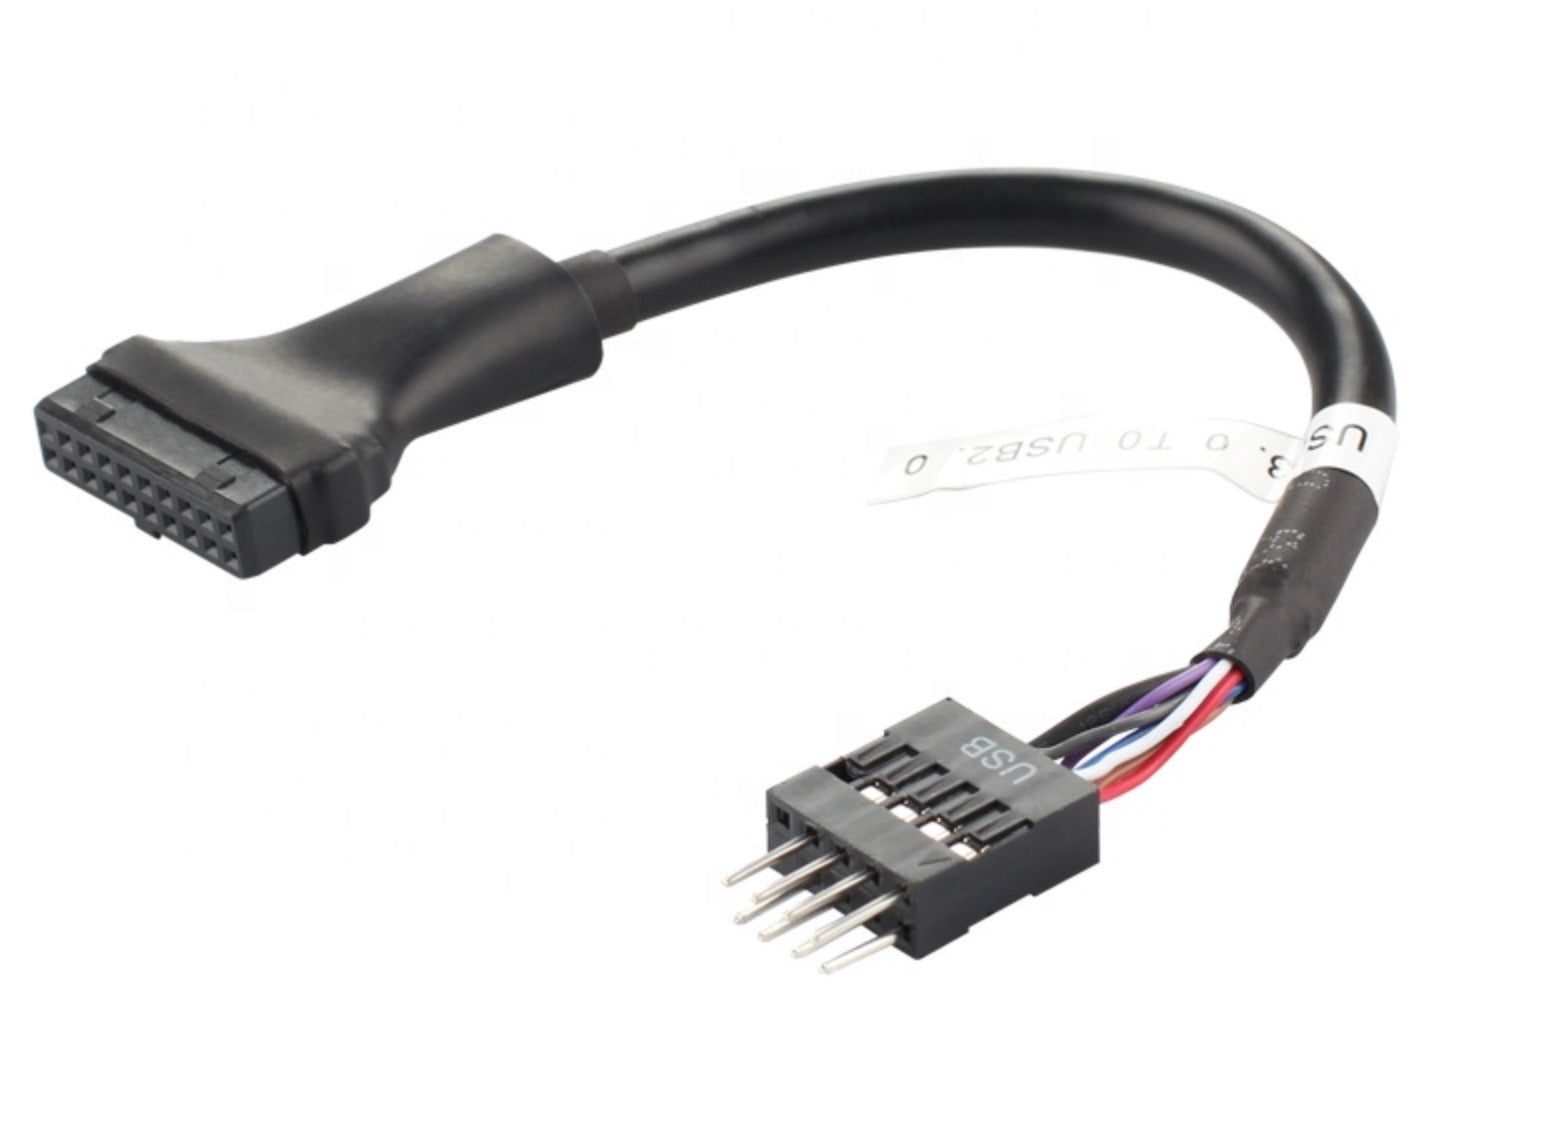 USB 3.0 20 Pin Motherboard Header Female to USB 2.0 8 Pin Male Adapter Cable 0.15m